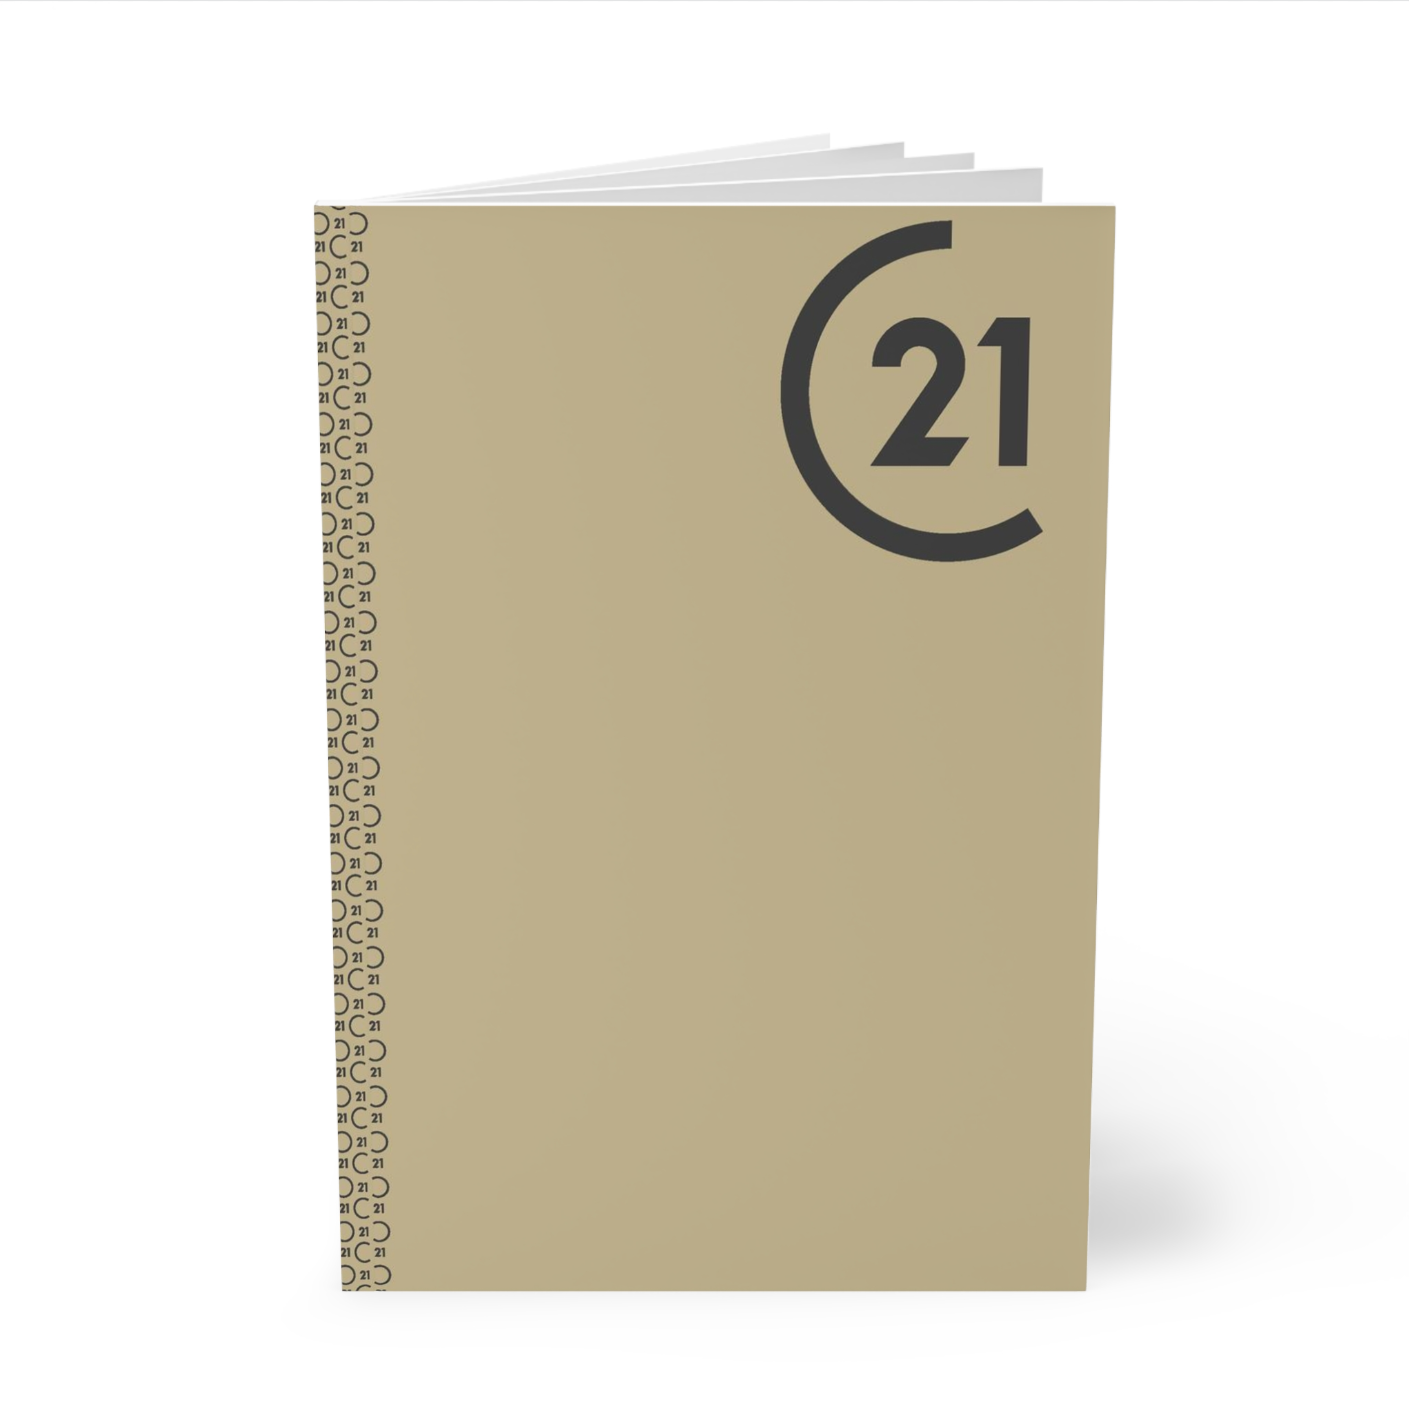 C21 Full Color SoftCover Binders Hazelnut (from as low as $6.18 per cover)